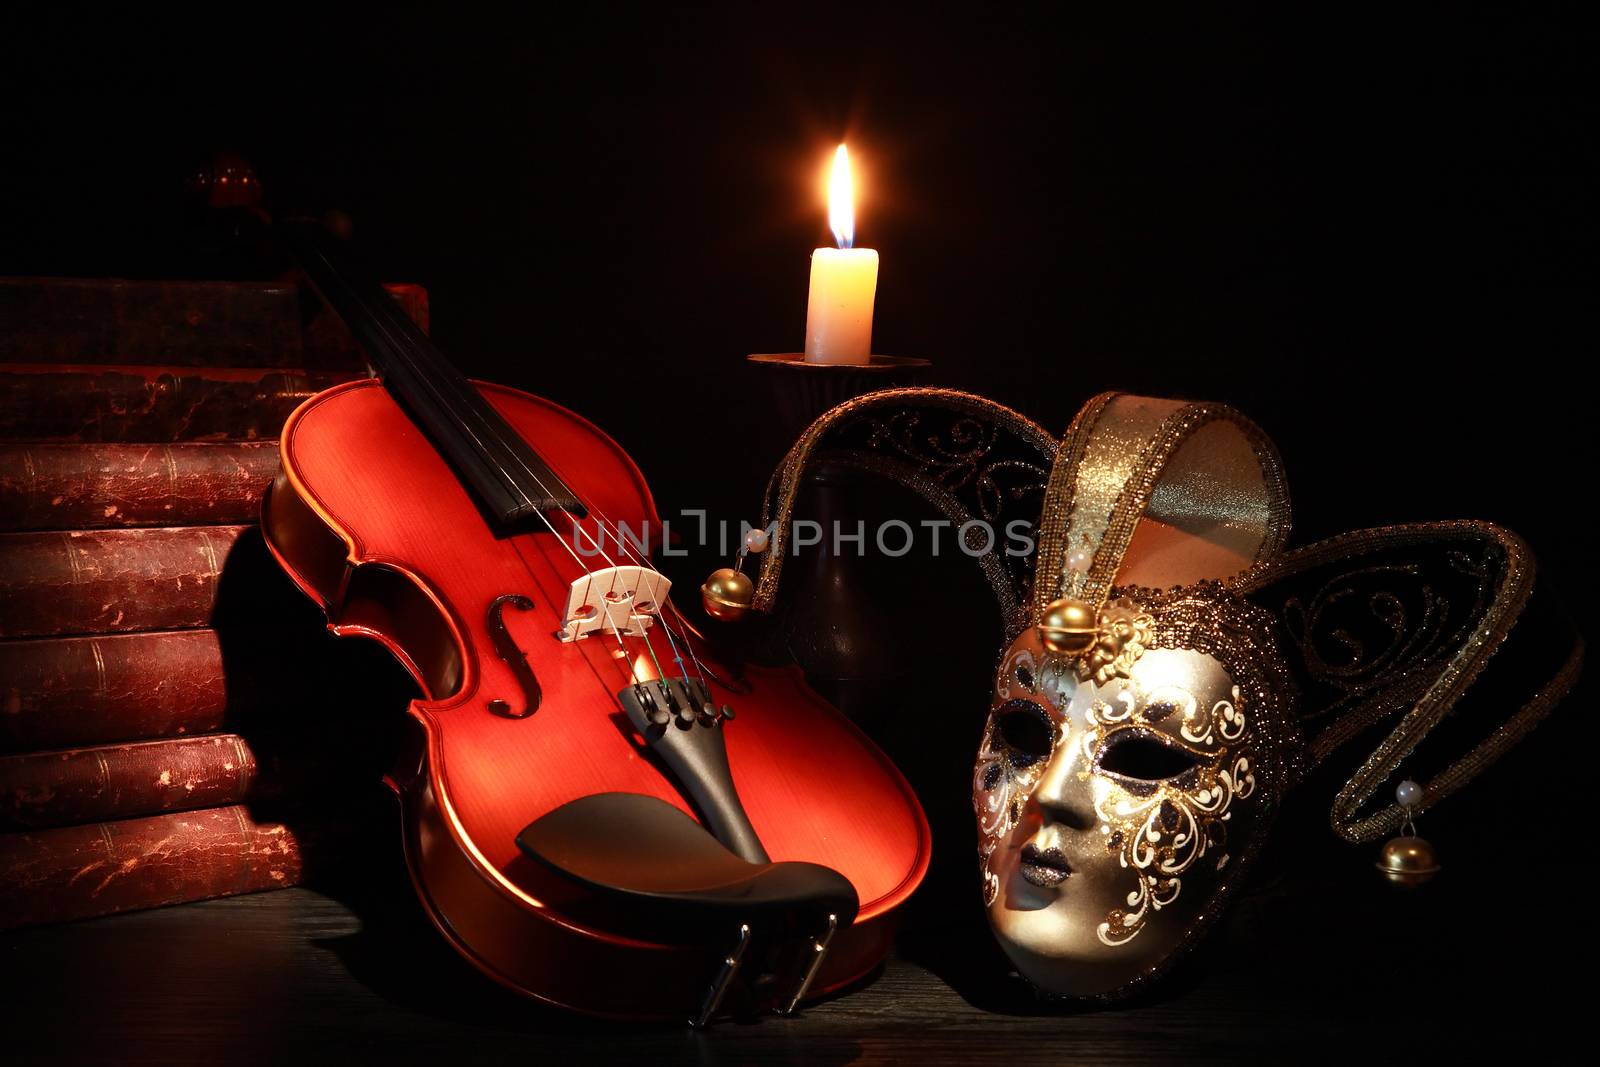 Nice violin near Venetian mask and candle against black background